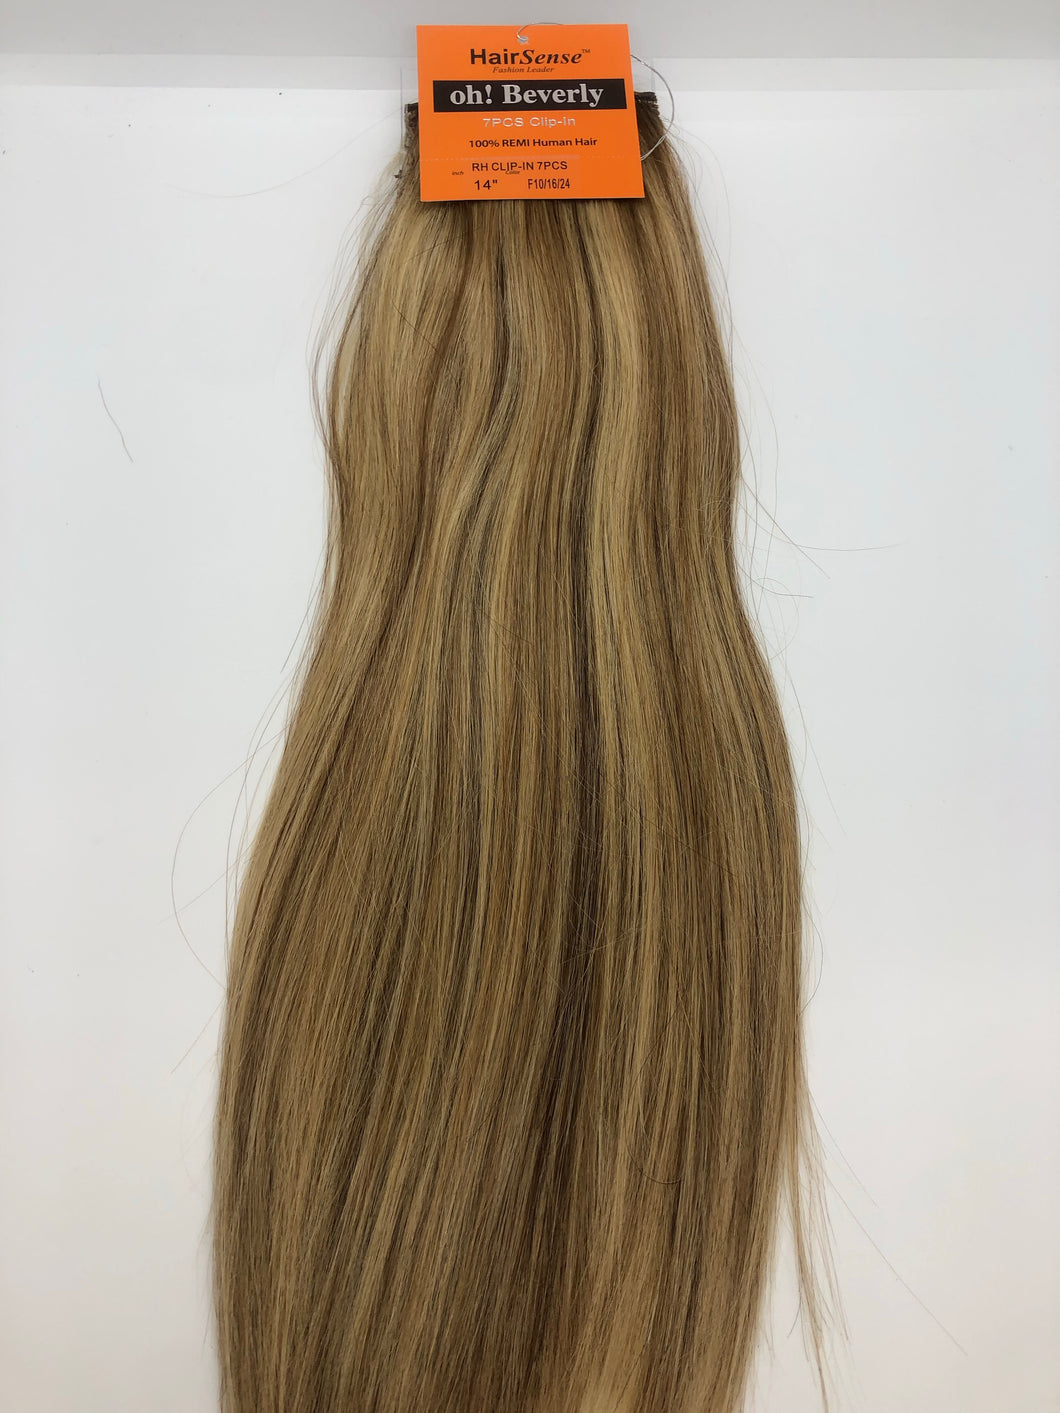 Hair Sense oh! Beverly 7 Piece Clip-In 100% REMI Human Hair Extension - Color: F10/16/24